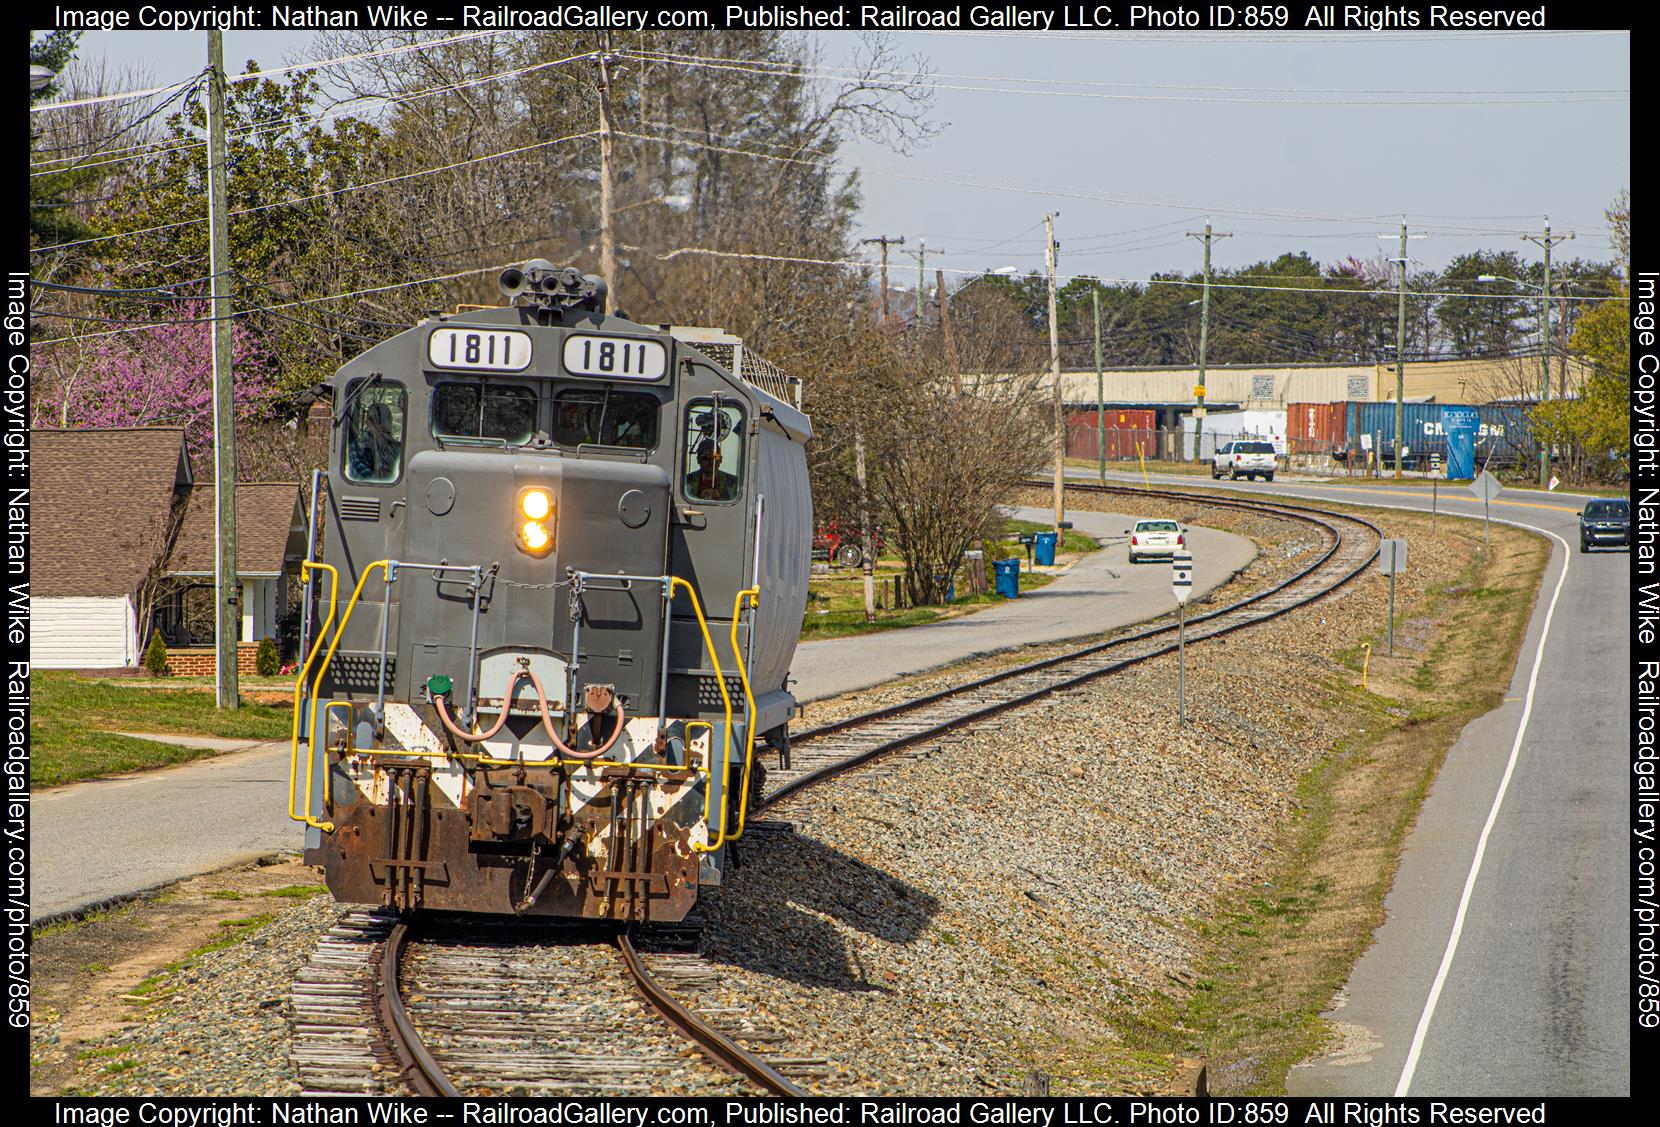 CWCY 1811 is a class GP16 and  is pictured in Granite Falls, North Carolina, United States.  This was taken along the Caldwell County Railroad  on the Caldwell County Railroad. Photo Copyright: Nathan Wike uploaded to Railroad Gallery on 03/19/2023. This photograph of CWCY 1811 was taken on Thursday, March 16, 2023. All Rights Reserved. 